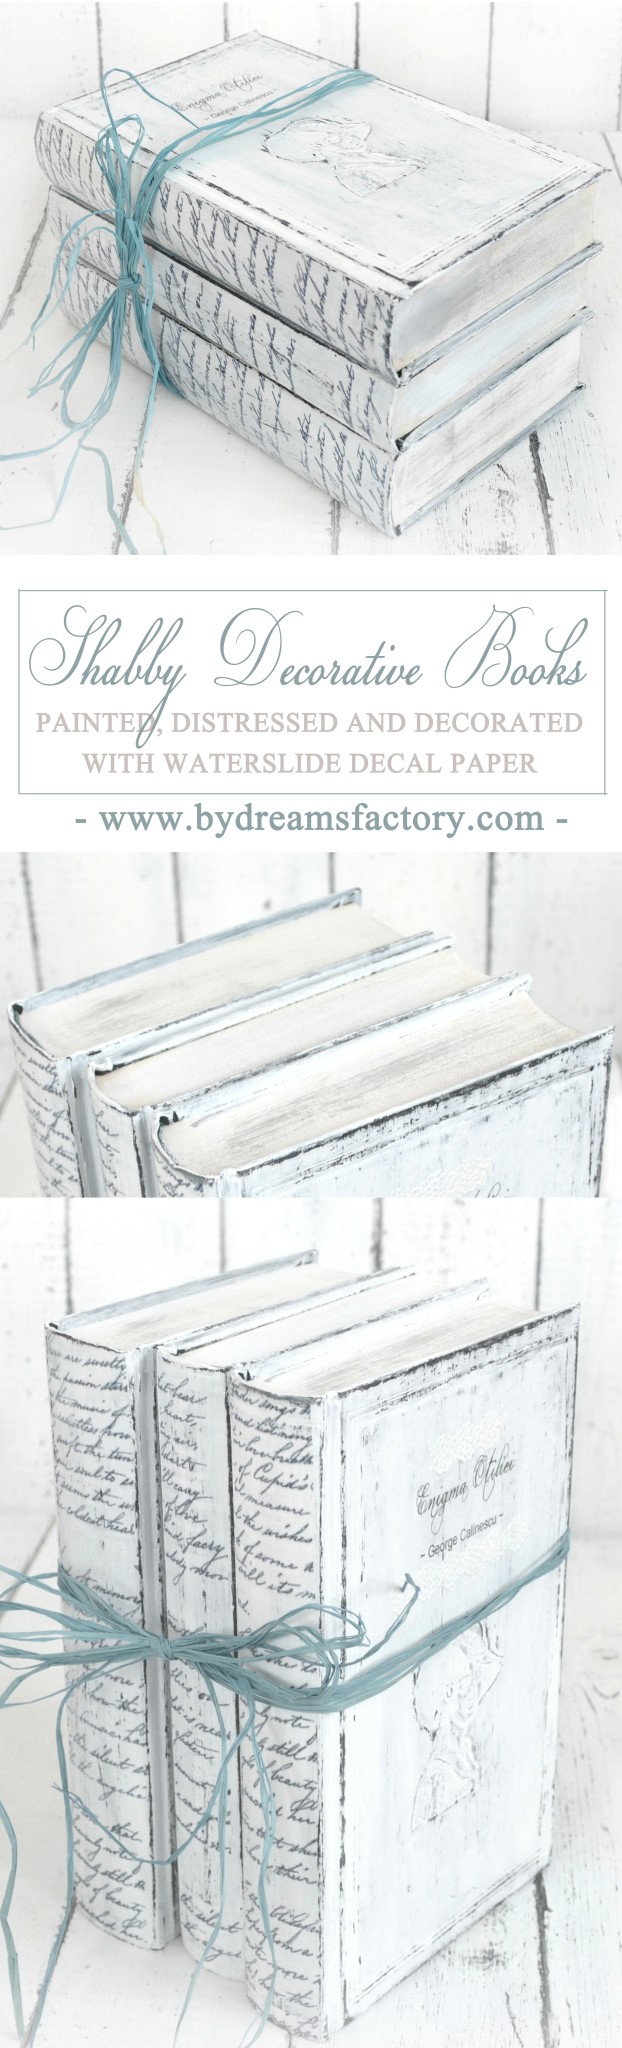 Make your own lovely Shabby decorative books - learn how to paint, distress and decorate them with decals 